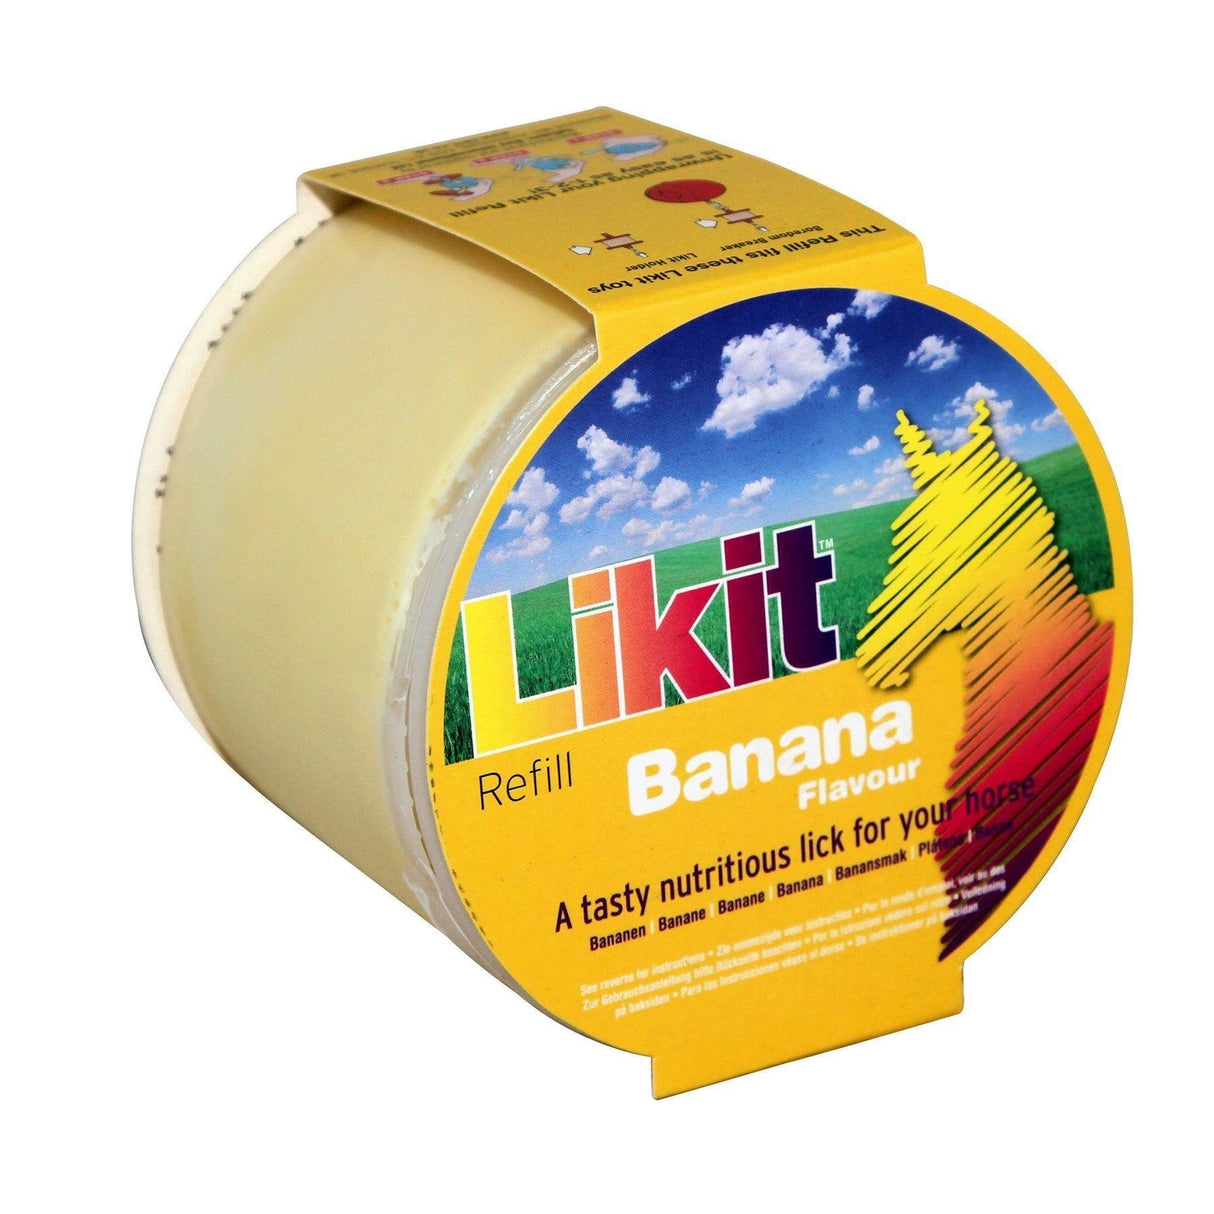 Likit Pack of 12 #flavour_banana